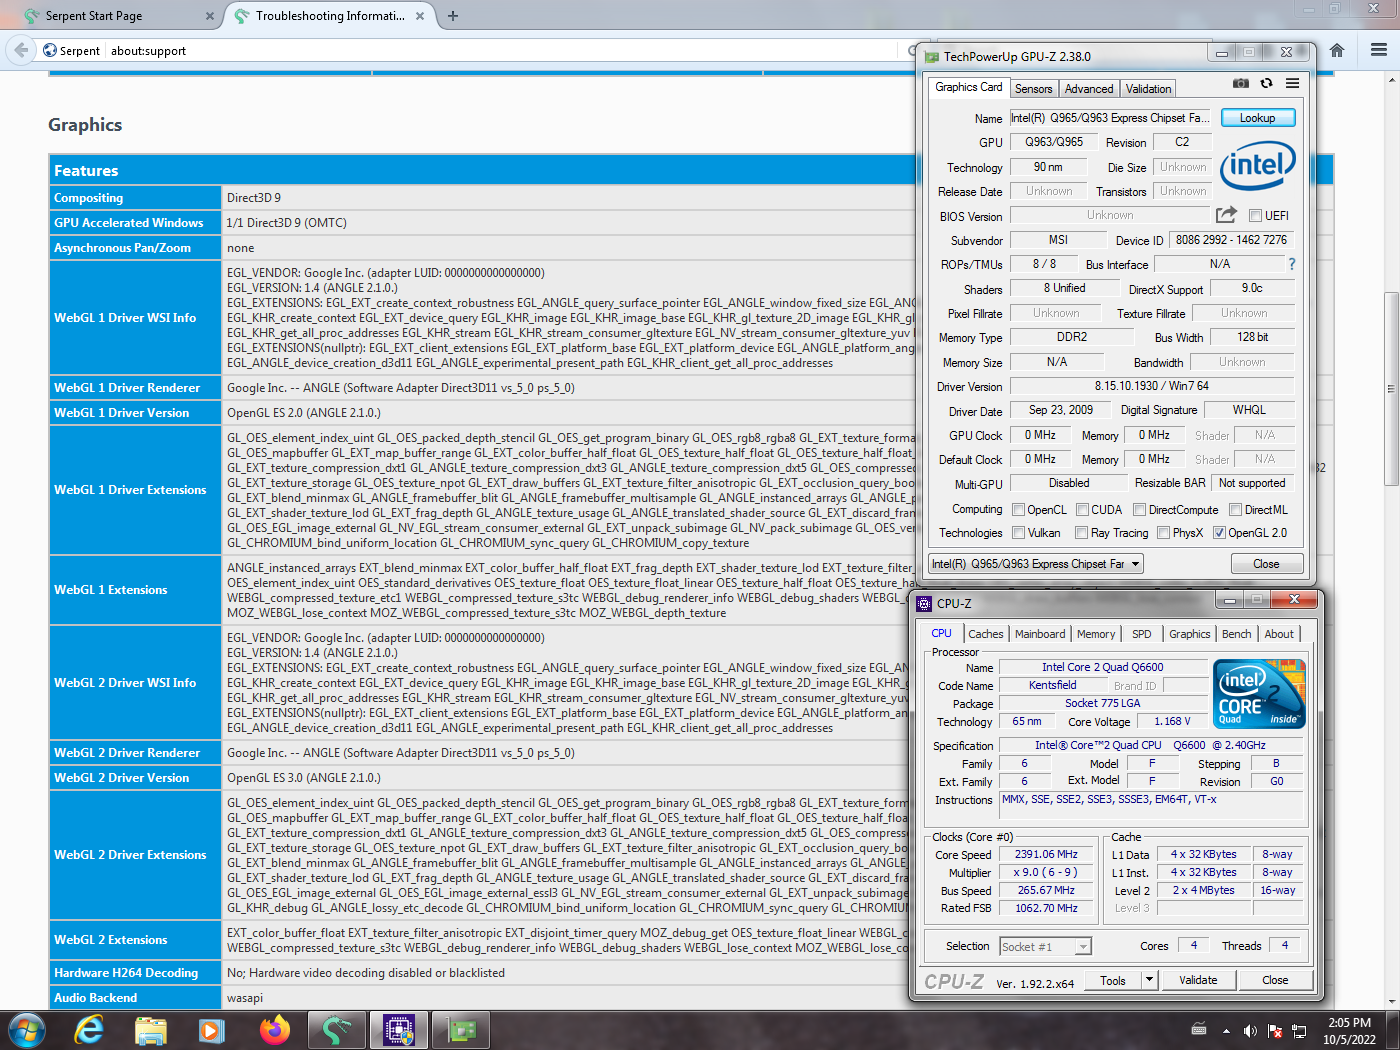 My Browser Builds (Part 3) - Page 141 - Browsers working on Older NT-Family  OSes - MSFN